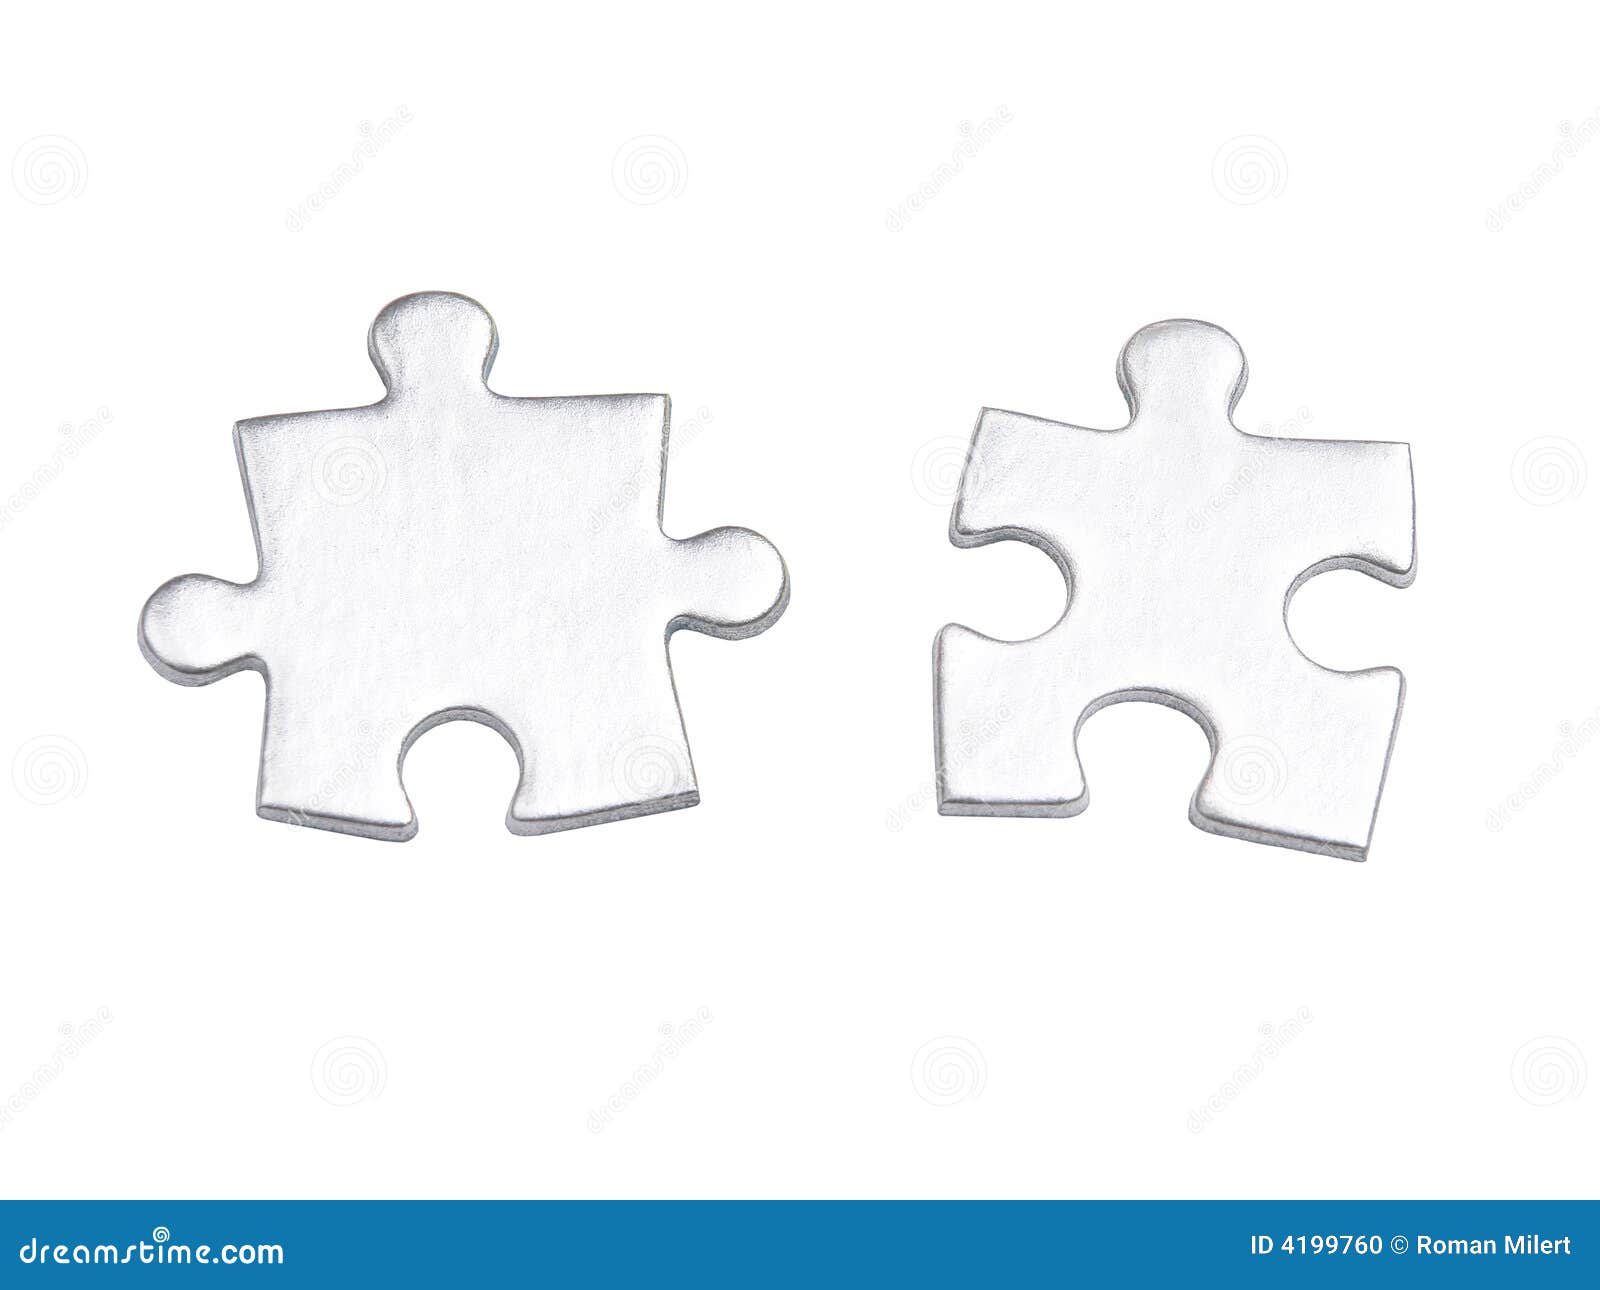 matching puzzle pieces